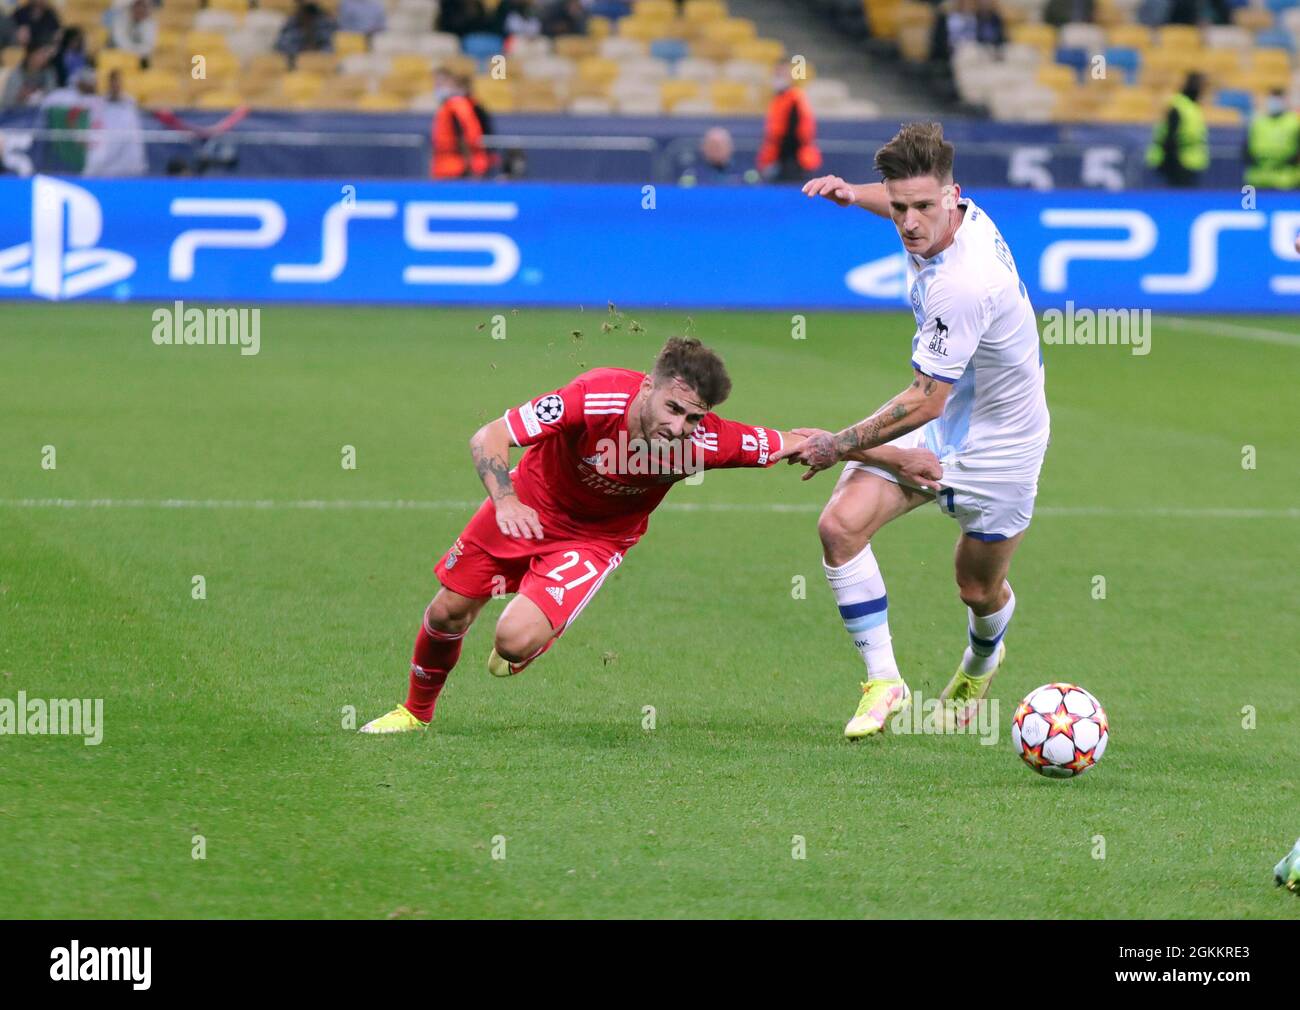 KYIV, UKRAINE - SEPTEMBER 14, 2021 - Players of FC Dynamo Kyiv Benjamin Verbych (R) and  S.L. Benfica Portugal Rafa Silva fight for the ball during the 2021/2022 UEFA Champions League Group E game which ended in a draw 0:0 at the NSC Olimpiyskiy in Kyiv, capital of Ukraine Stock Photo